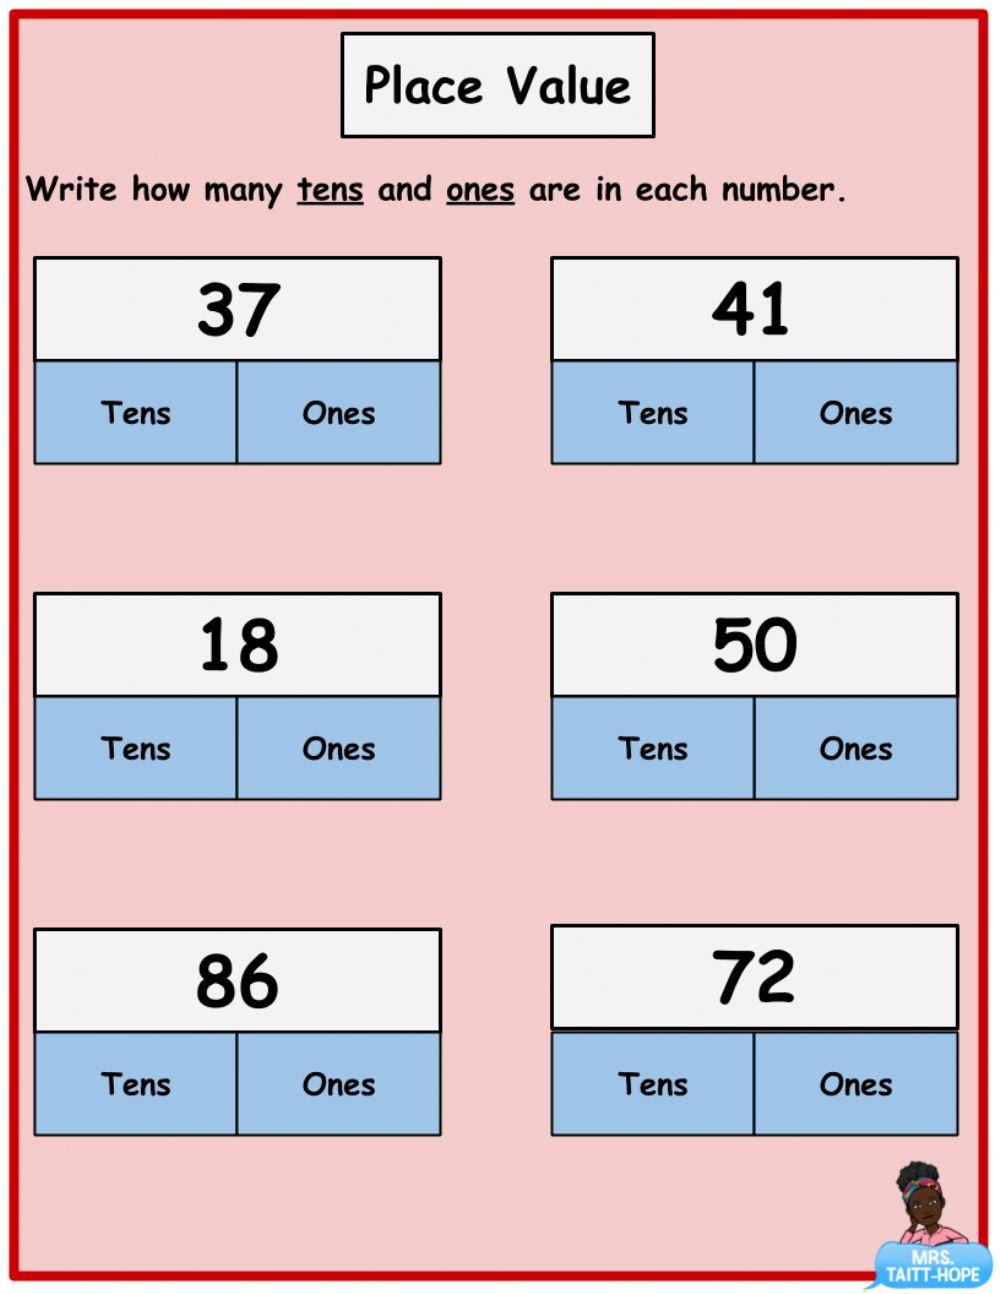 Place Value of 2 Digit Numbers - 2